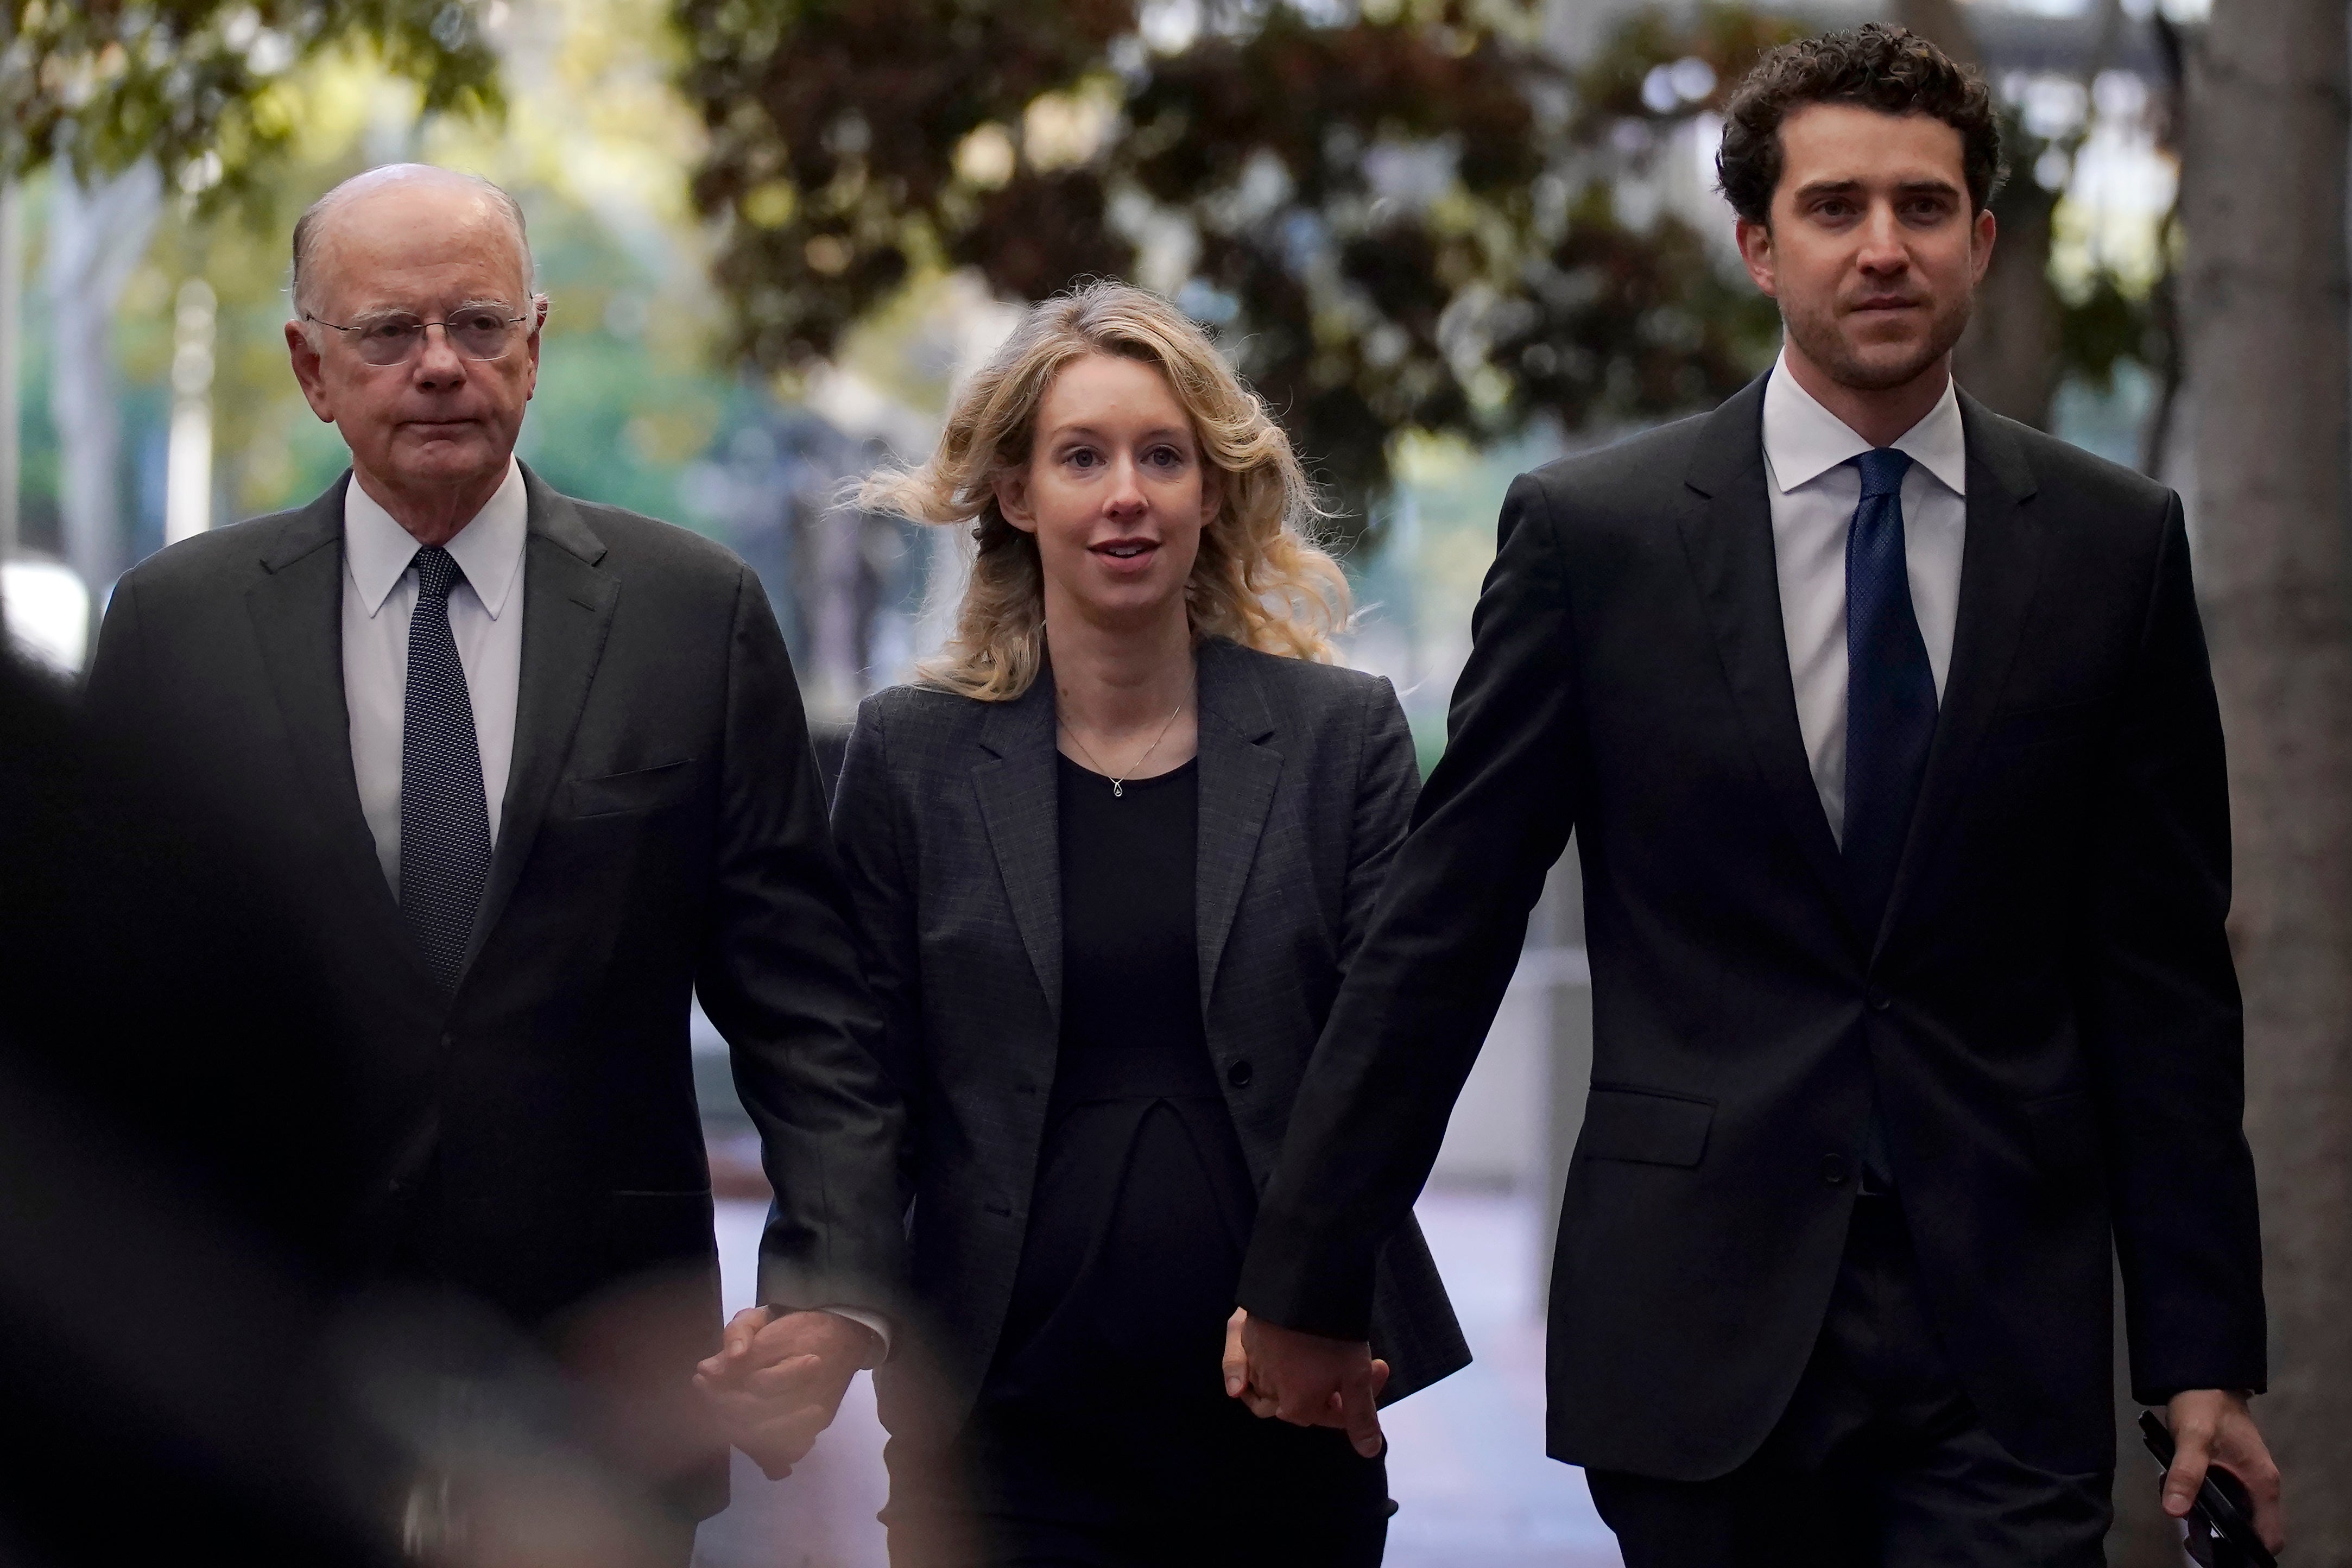 Former Theranos CEO Elizabeth Holmes, center, arrives at federal court with her father, Christian Holmes IV, at trial in 2022.